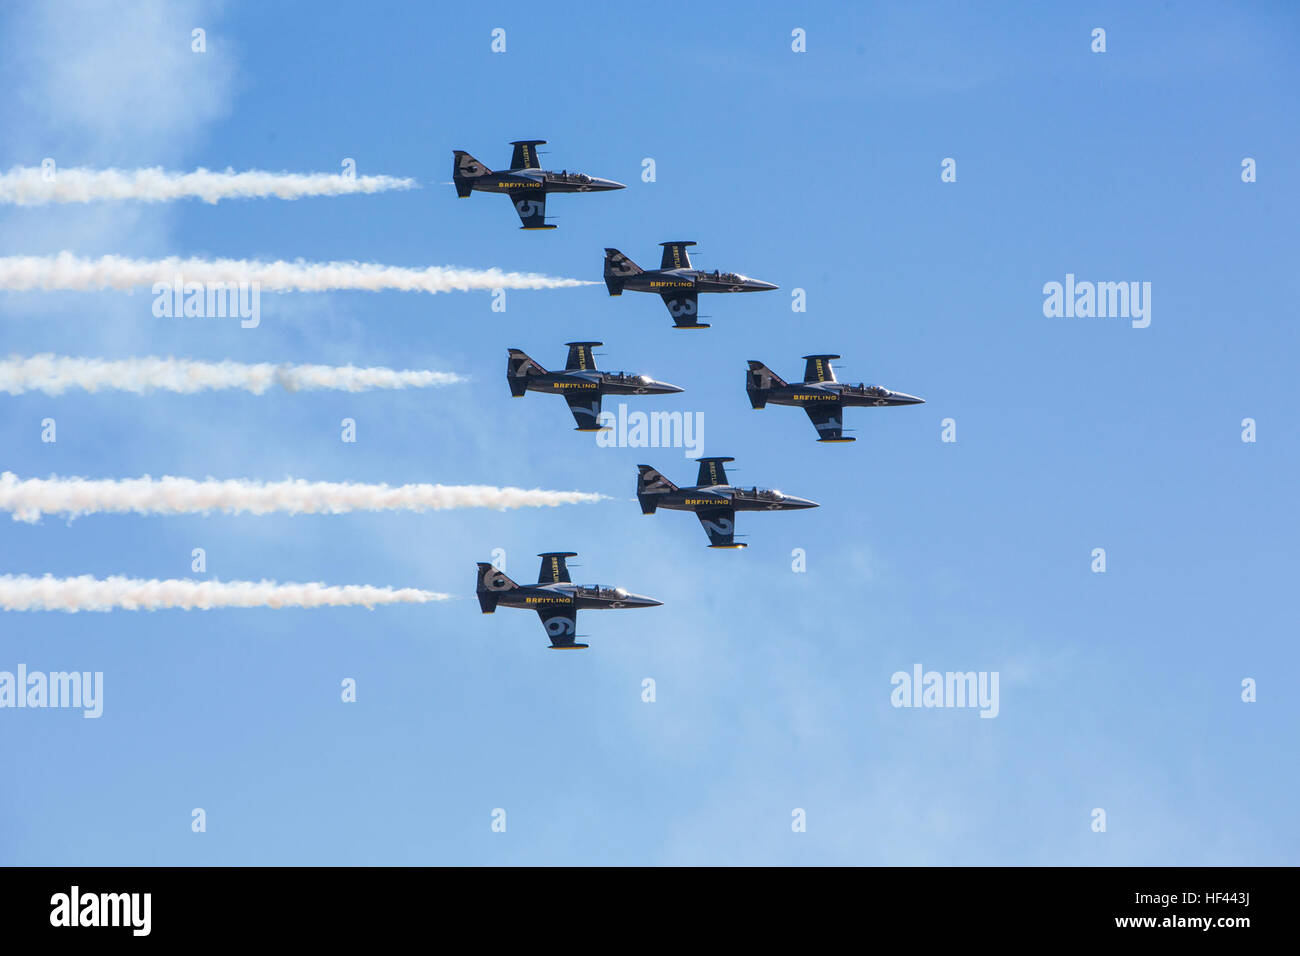 The Breitling Jet Team fly in precision formation during the 2016 Marine Corps Air Station (MCAS) Miramar Air Show at MCAS Miramar, Calif., Sept. 24, 2016. The MCAS Miramar Air Show honors 100 years of the Marine Corps Reserves by showcasing aerial prowess of the Armed Forces and their appreciation of the civilian community’s support to the troops. (U.S. Marine Corps photo By Corporal Jessica Y. Lucio/Released) MCAS Miramar Air Show 160924-M-UX416-009 Stock Photo